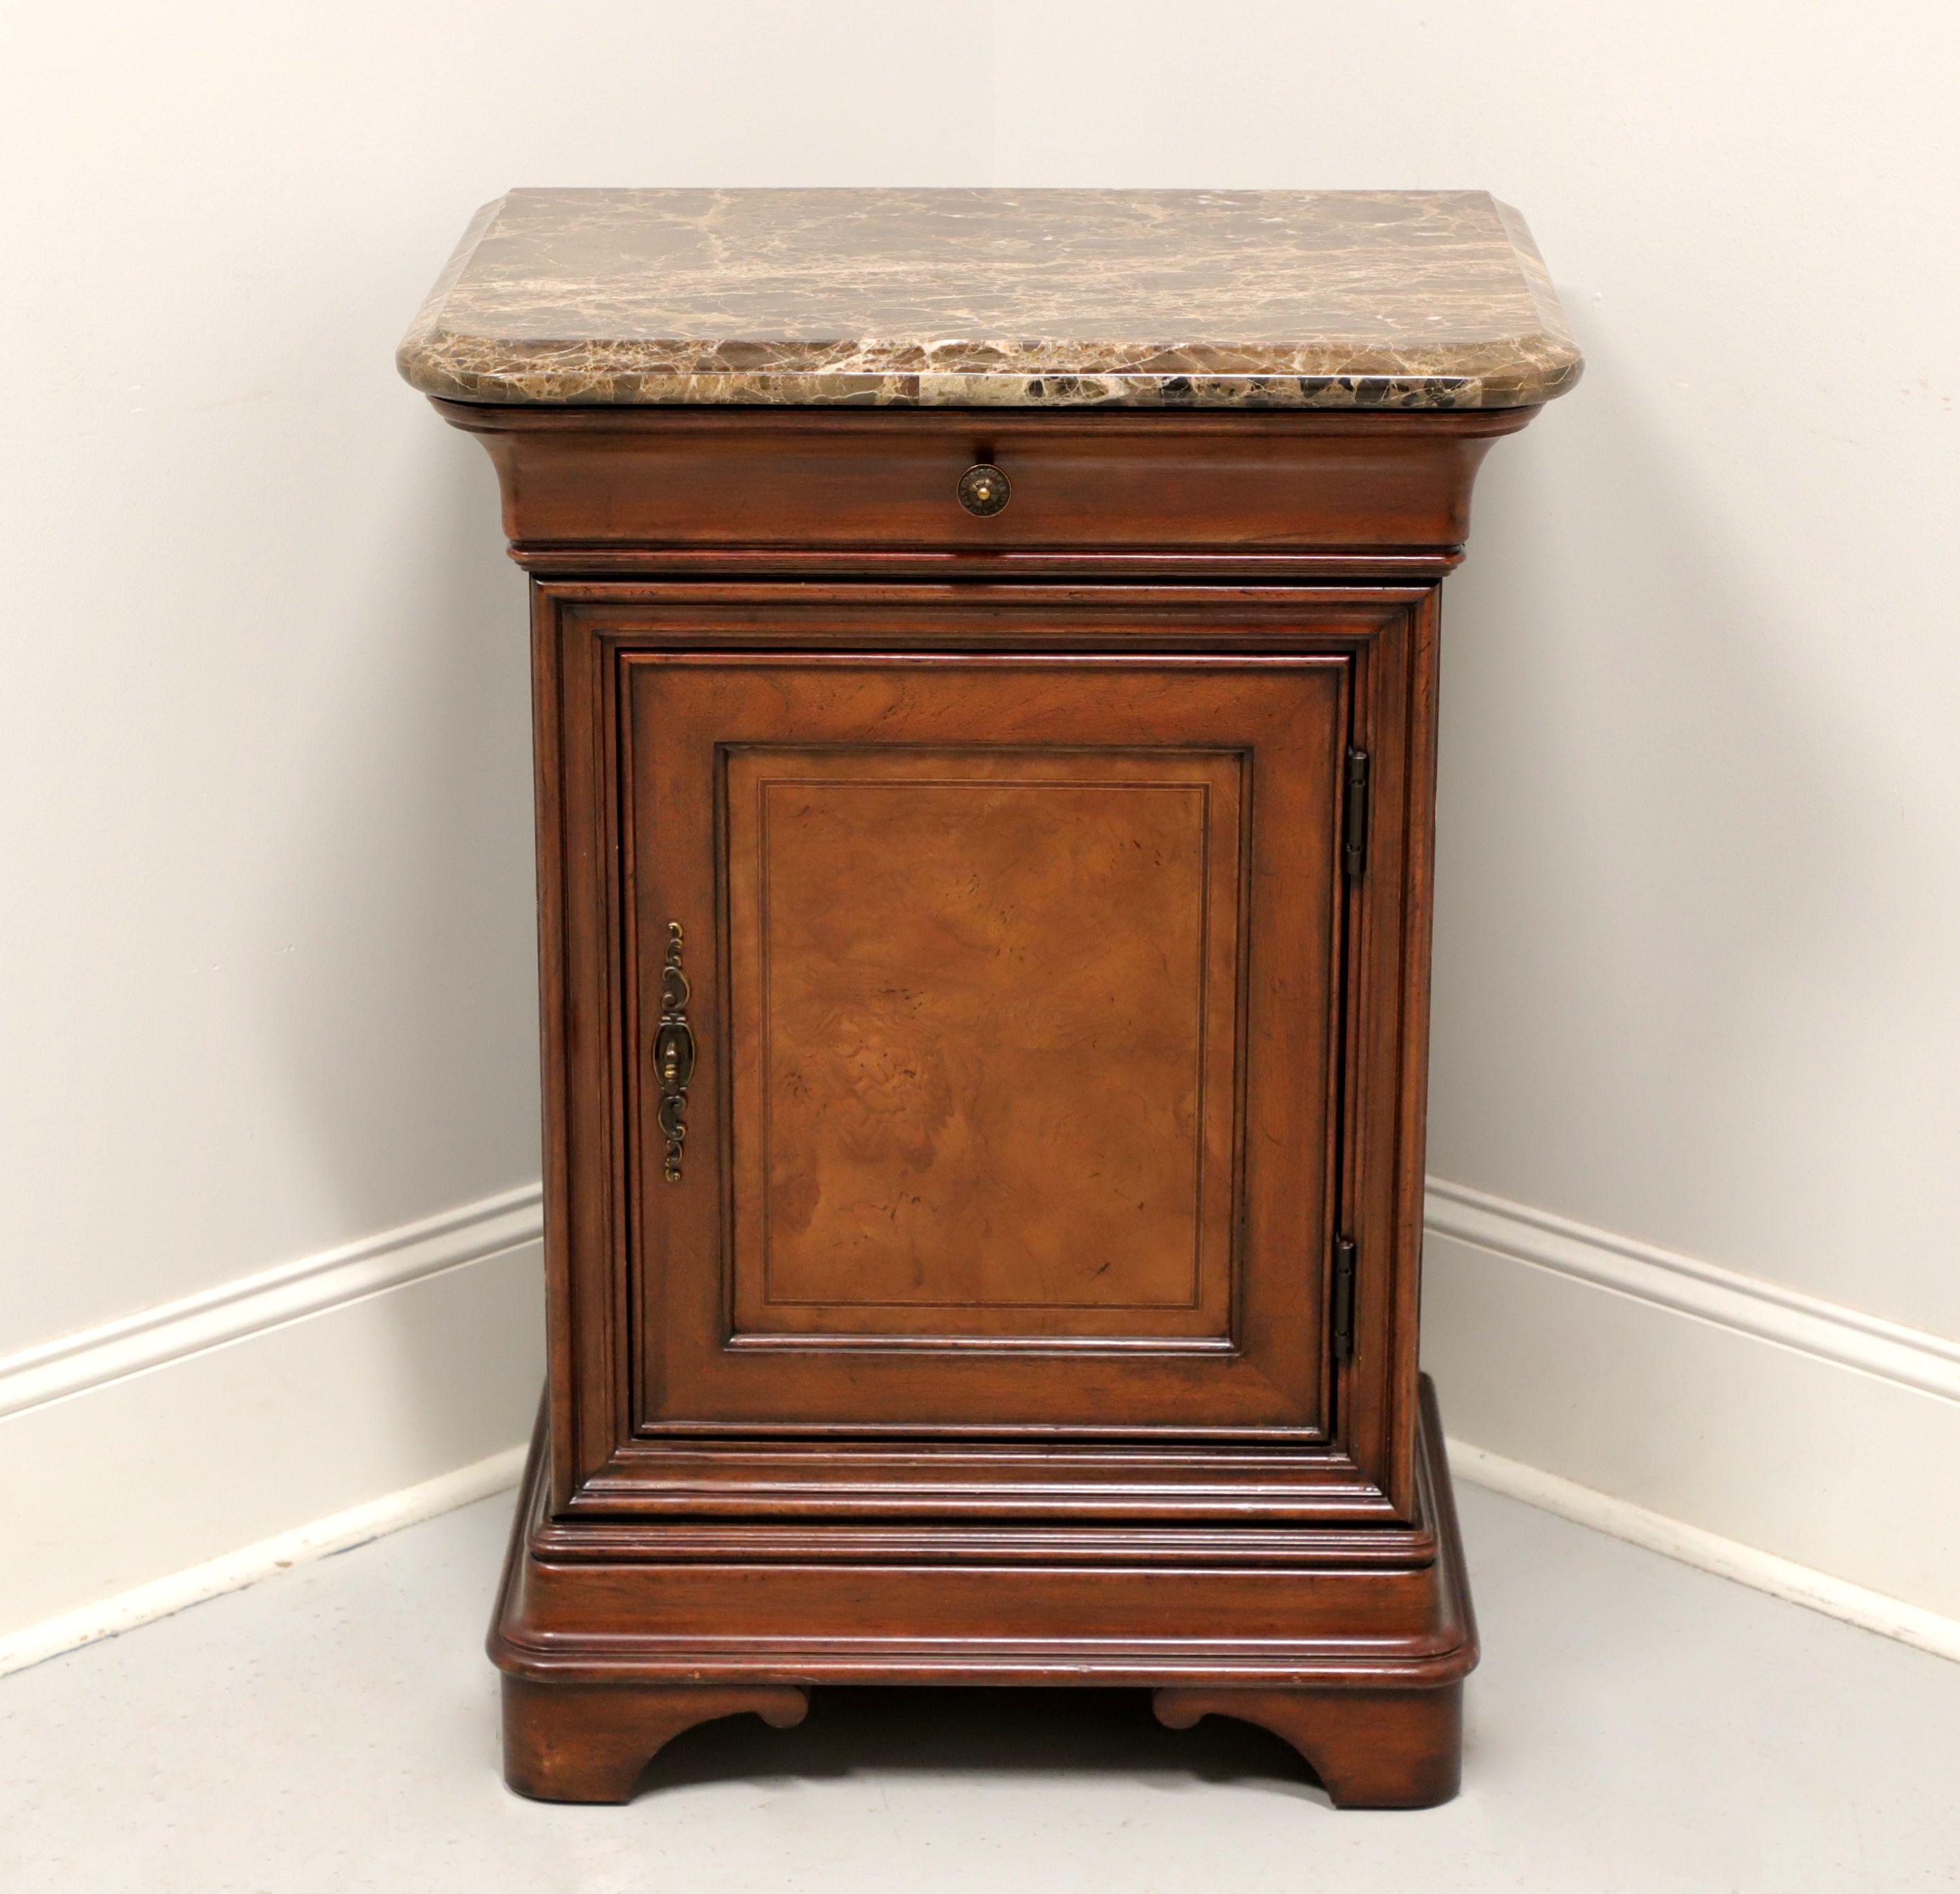 A Transitional style bedside cabinet by Thomasville. Elm with inlaid burl elm to door front, brass hardware, cultured marble top and bracket feet. Features one drawer concealed in the upper moulding over a single door lower cabinet revealing storage